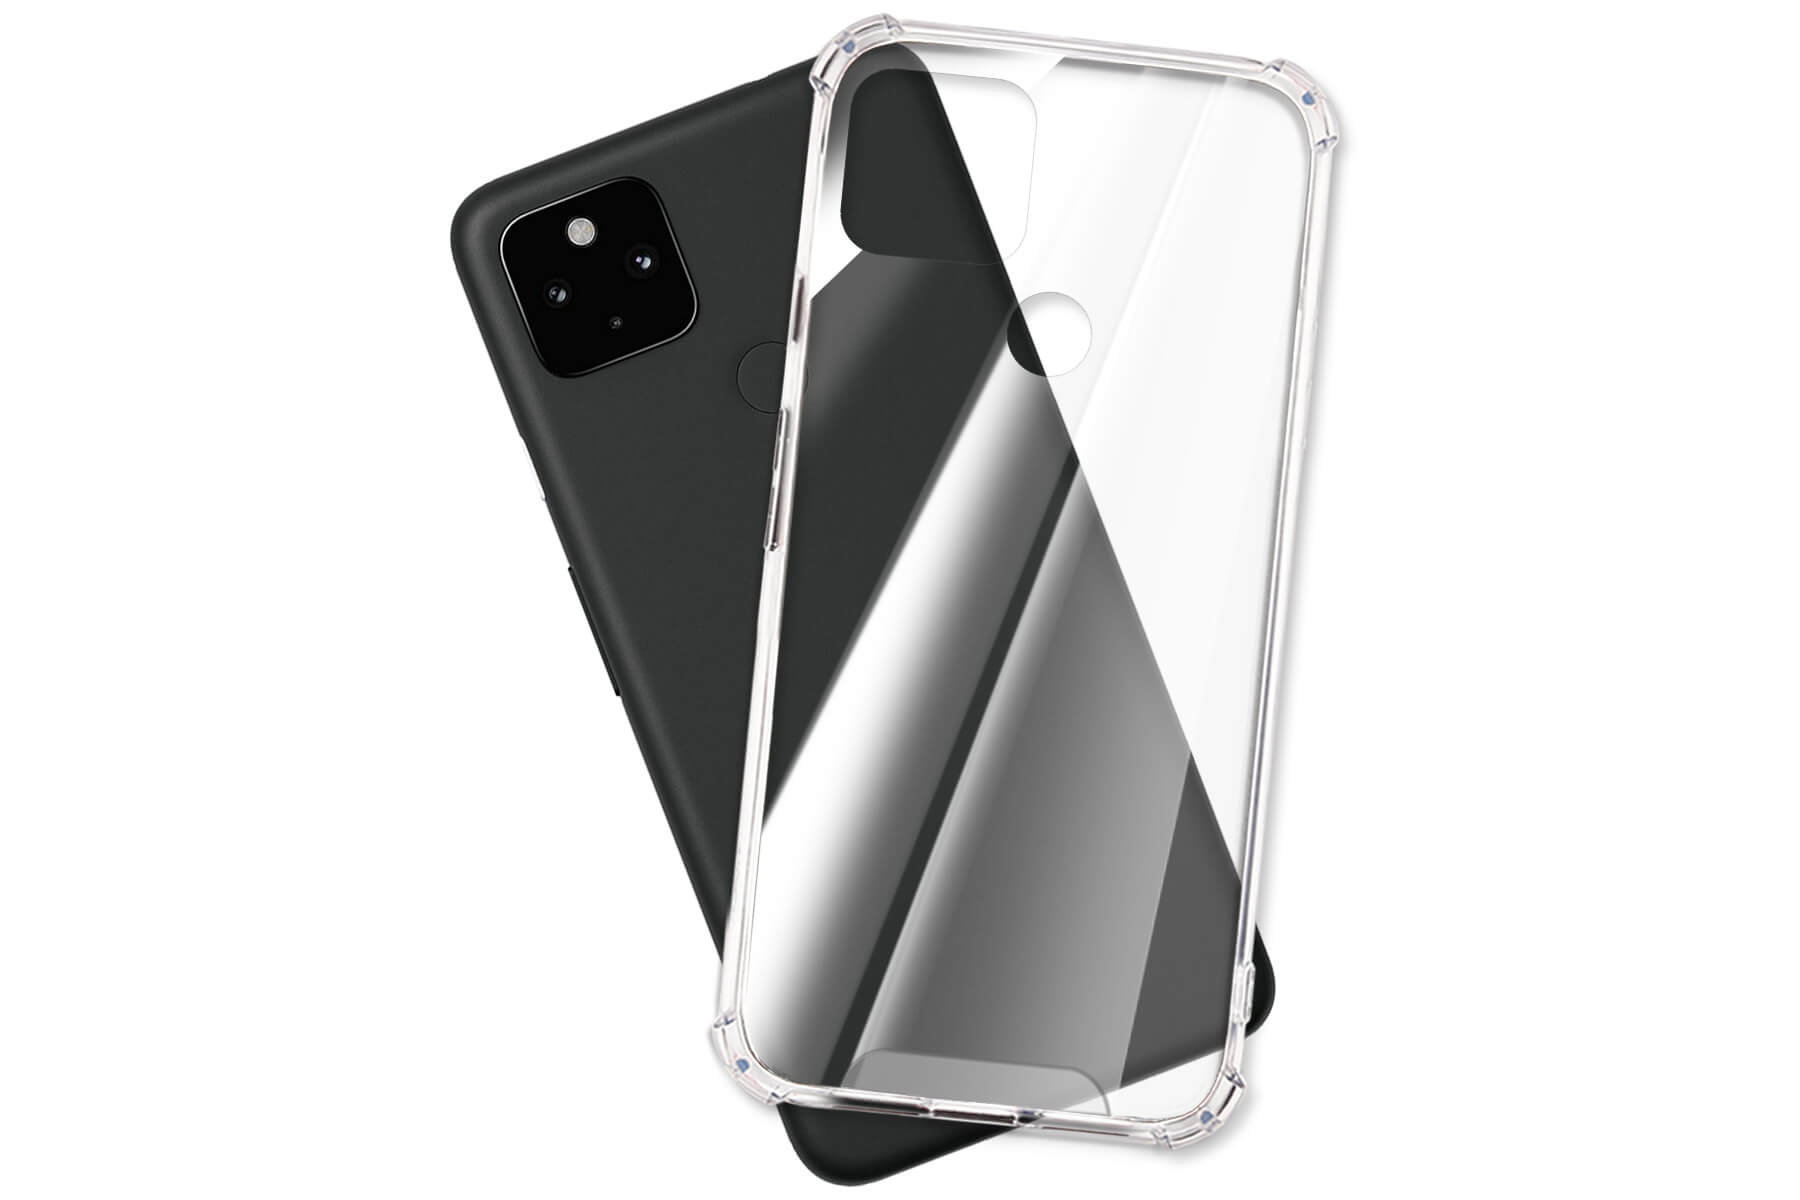 4a ENERGY Case, MORE Transparent Backcover, Pixel MTB 5G, Armor Google, Clear